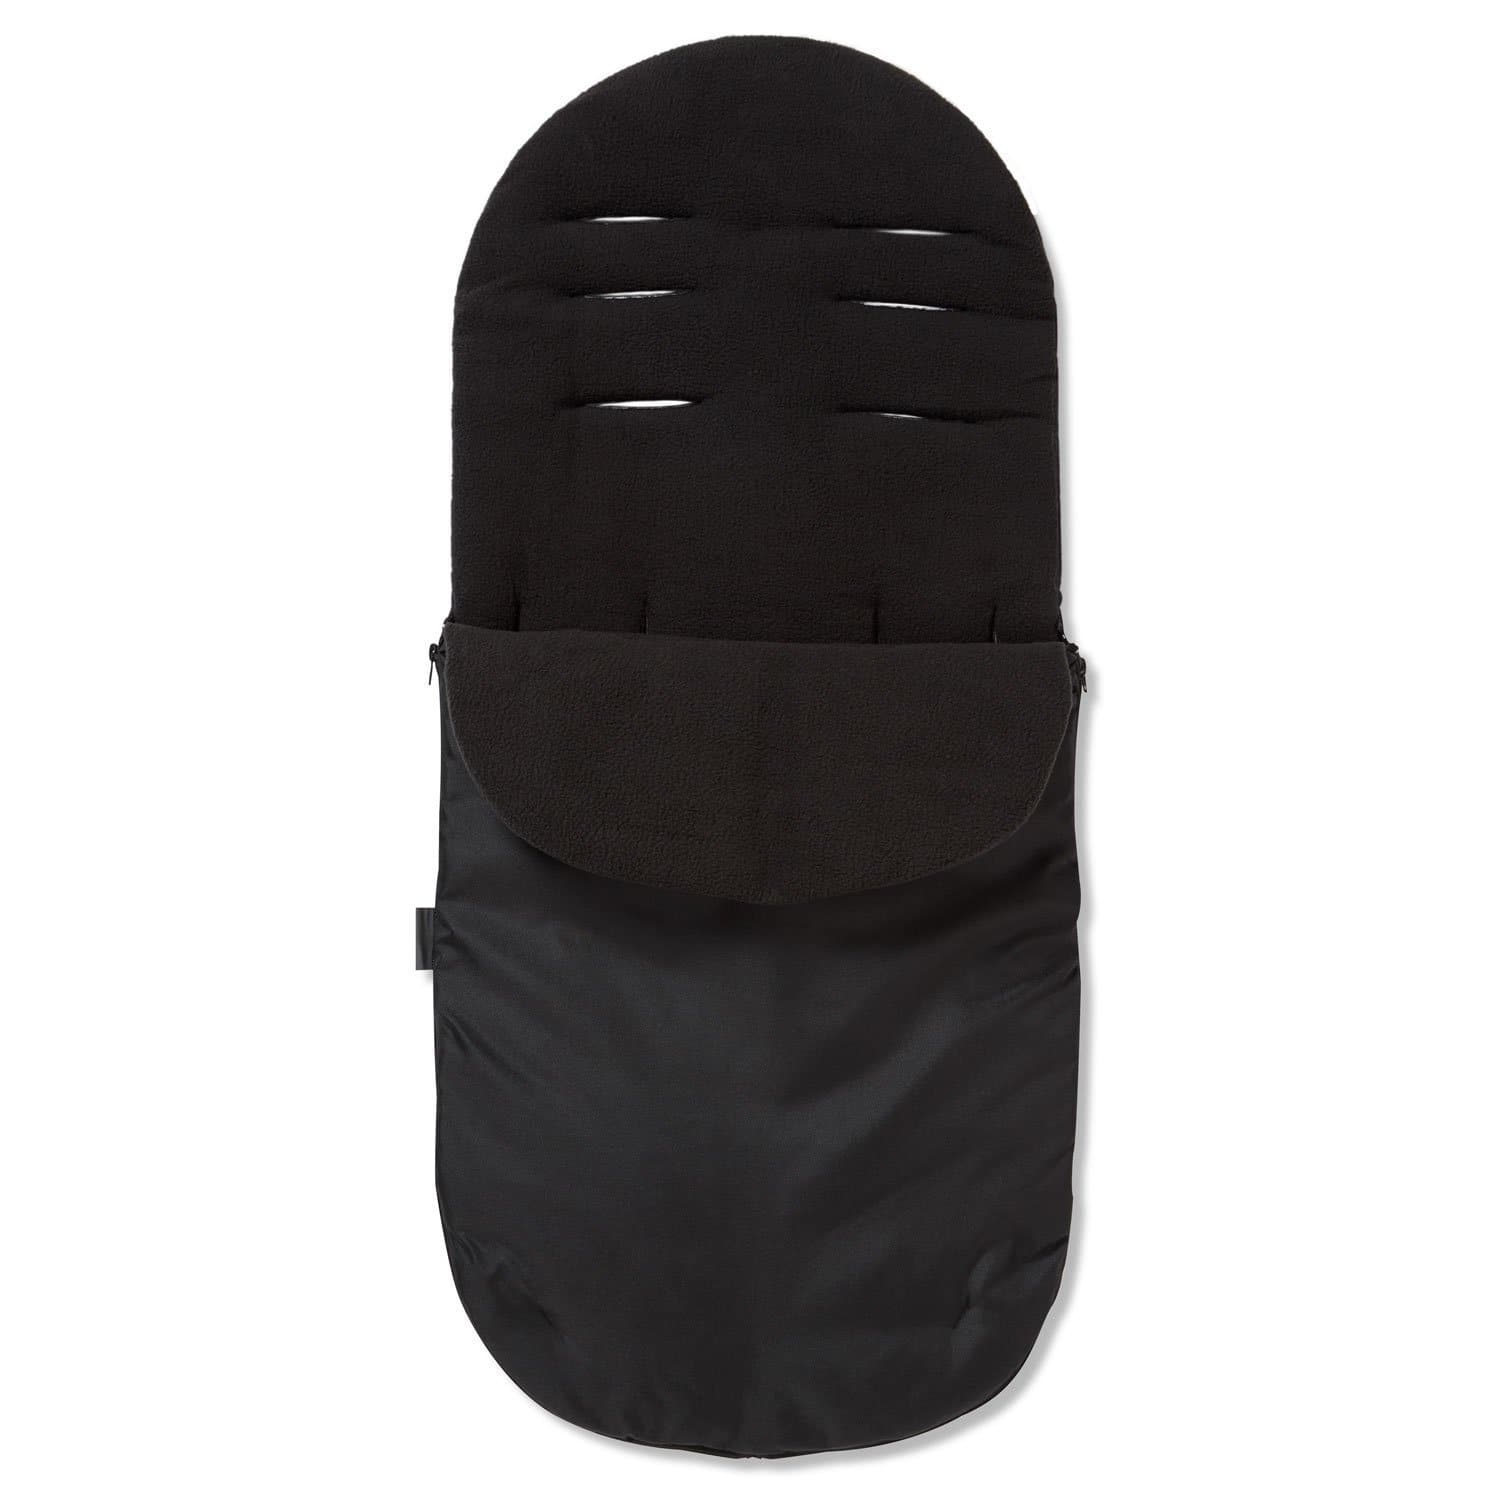 Footmuff / Cosy Toes Compatible with Bebe 9 - Black / Fits All Models | For Your Little One